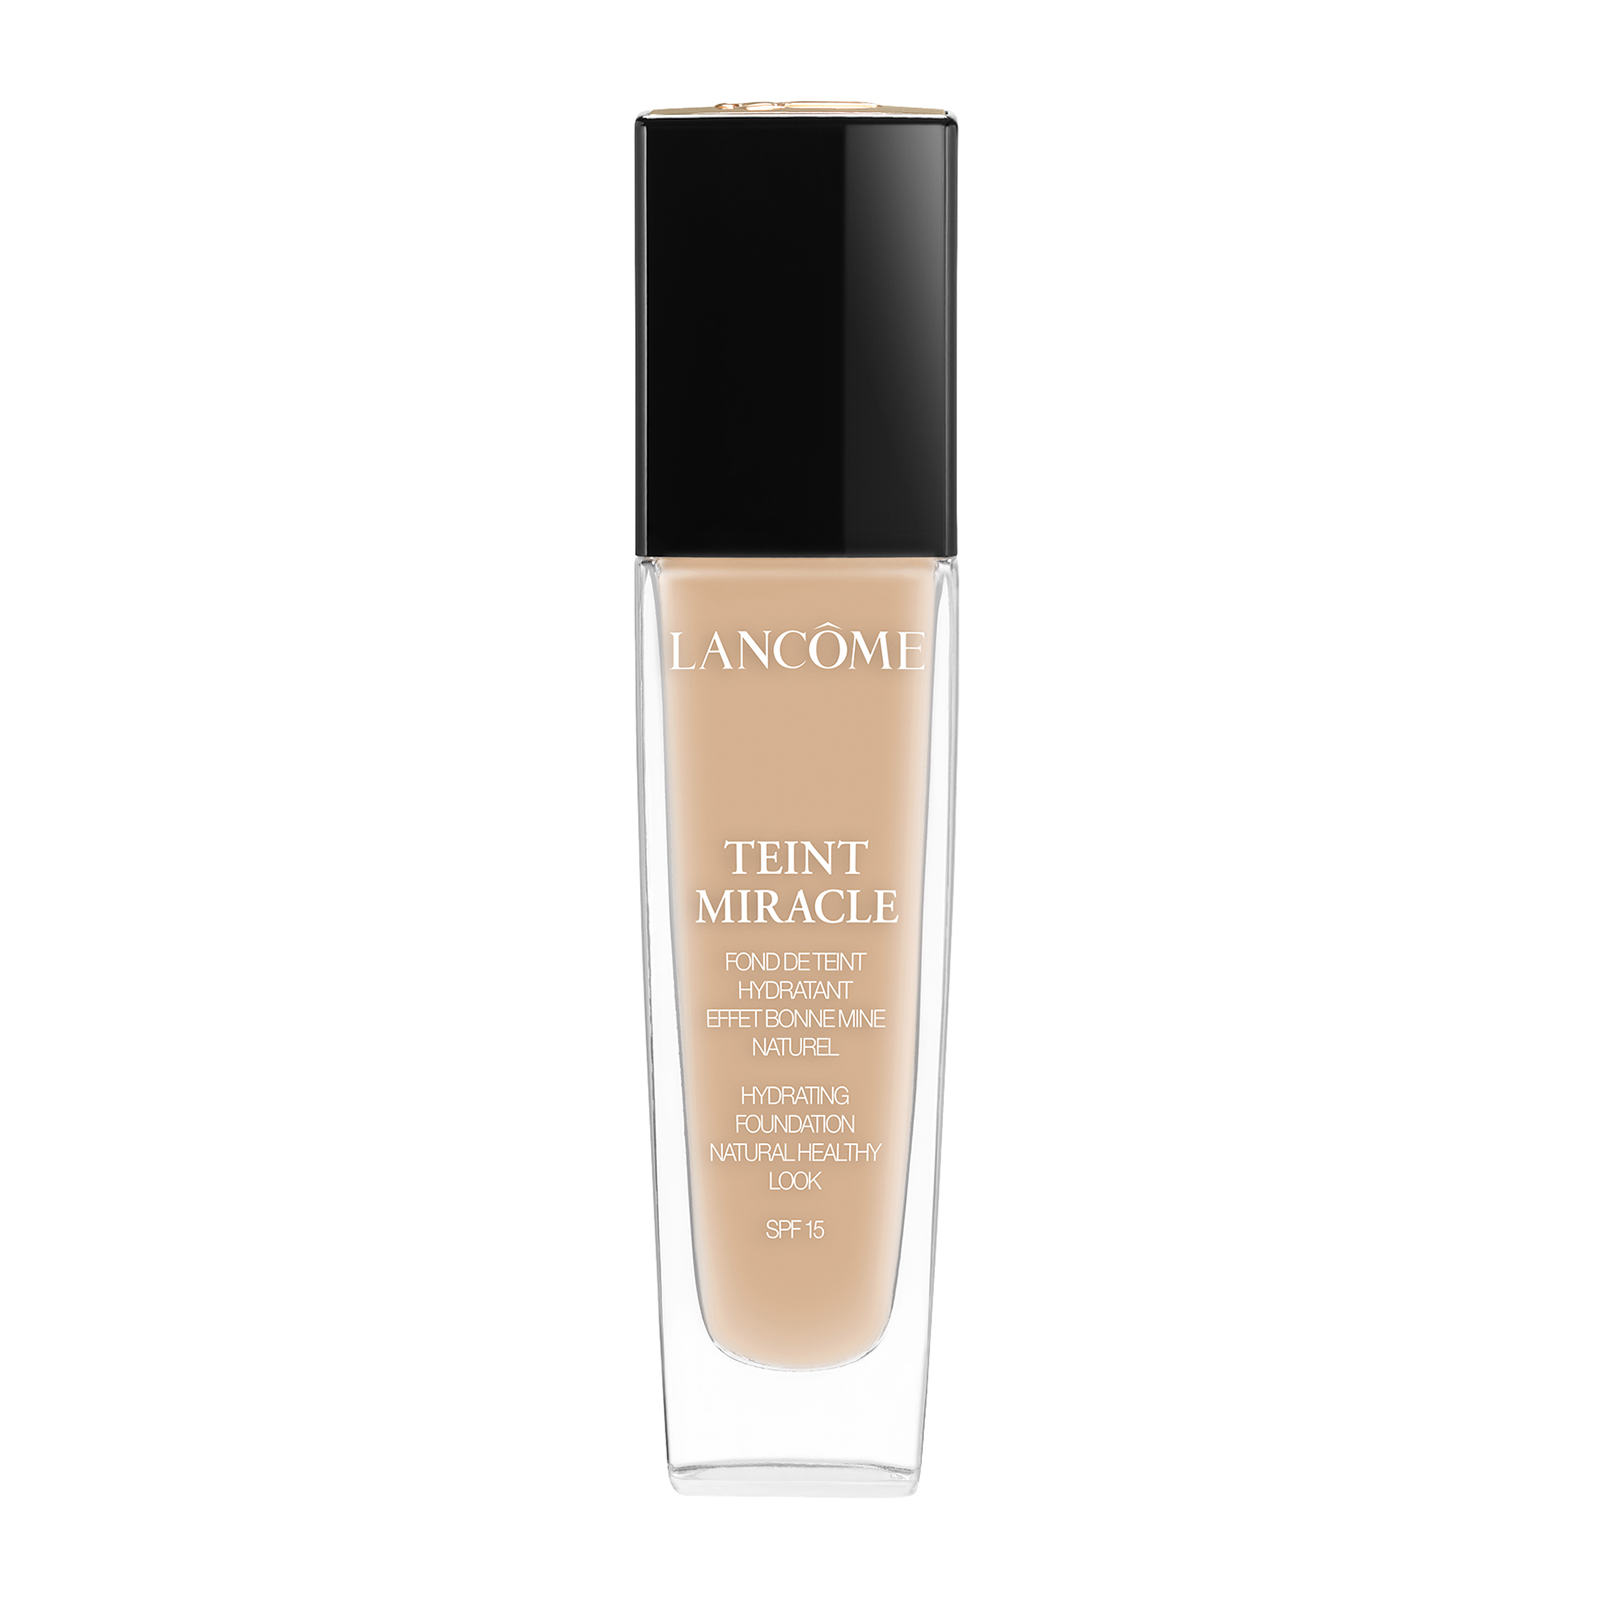 Lancome Teint Miracle Bare Skin Perfection Foundation Spf15 30Ml 035 Beige Dore (Medium, Neutral)